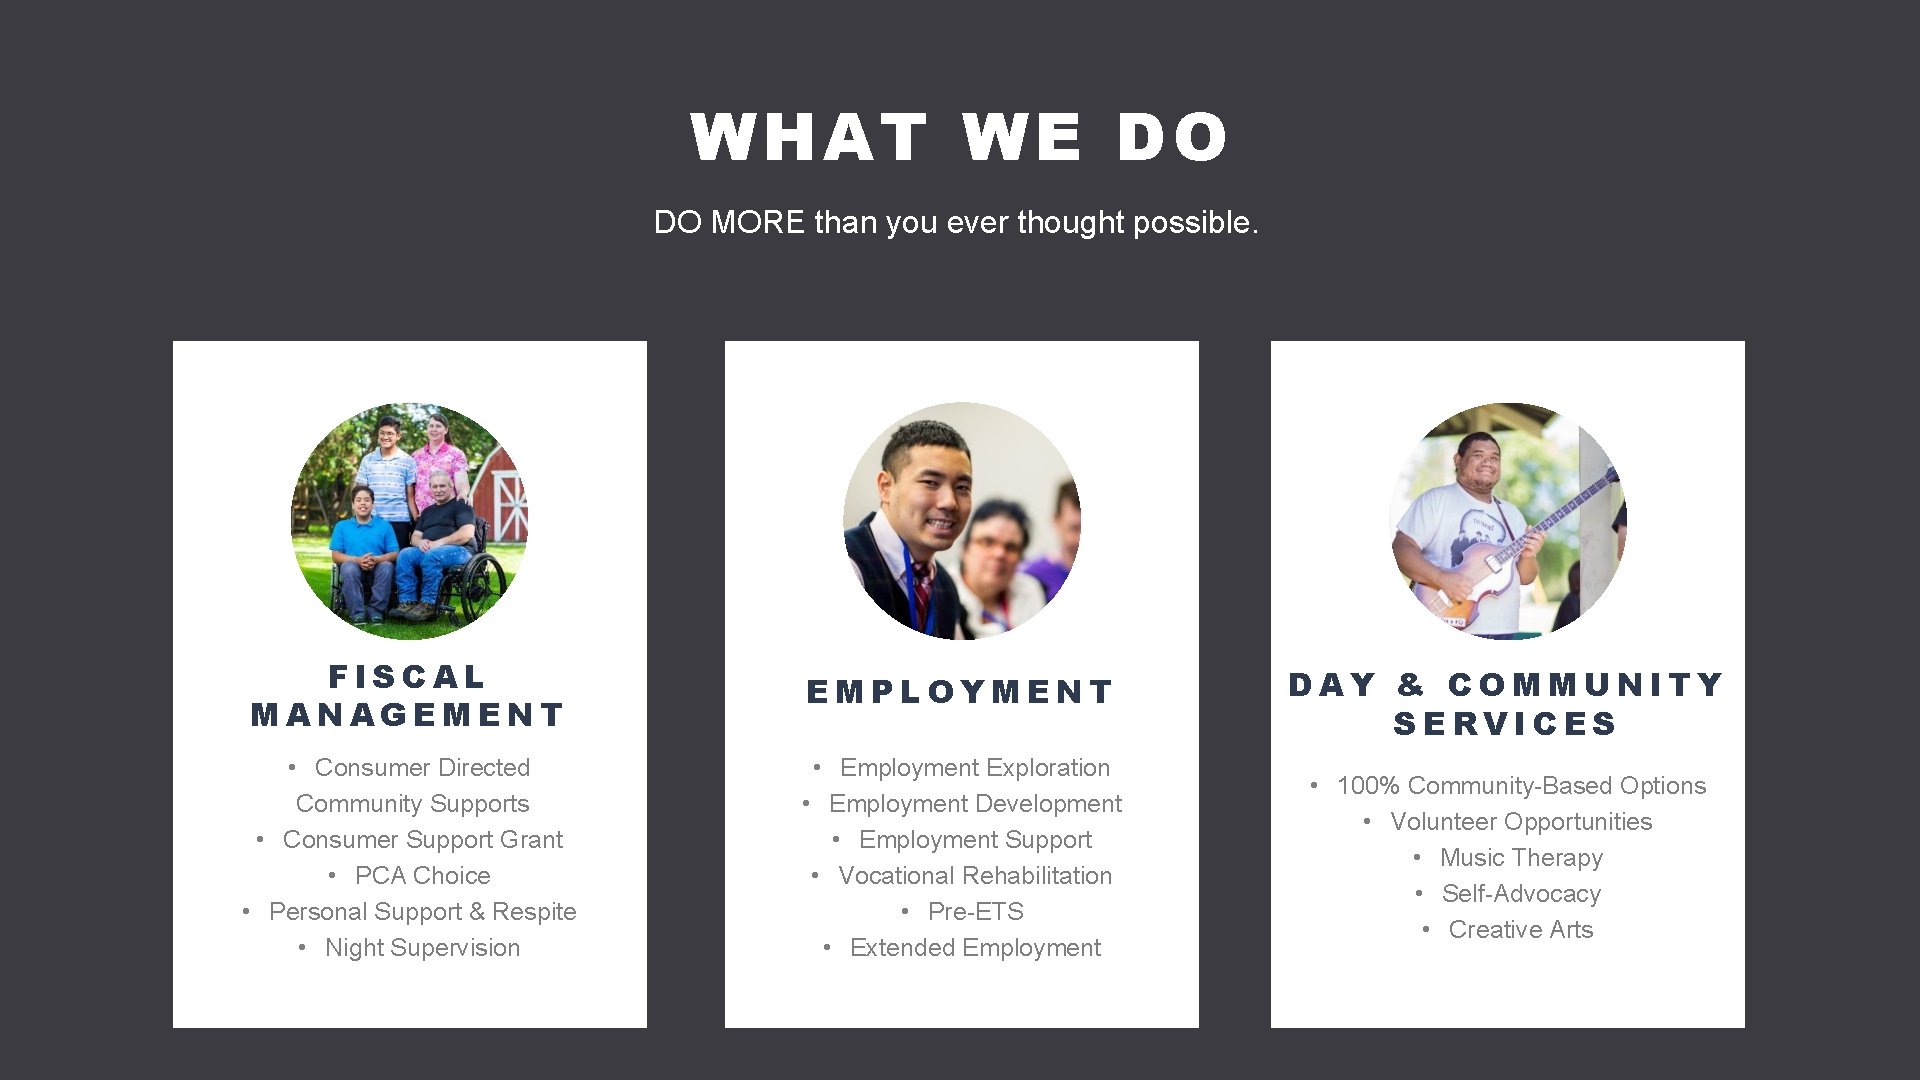 5 WHAT WE DO DO MORE than you ever thought possible. FISCAL MANAGEMENT EMPLOYMENT